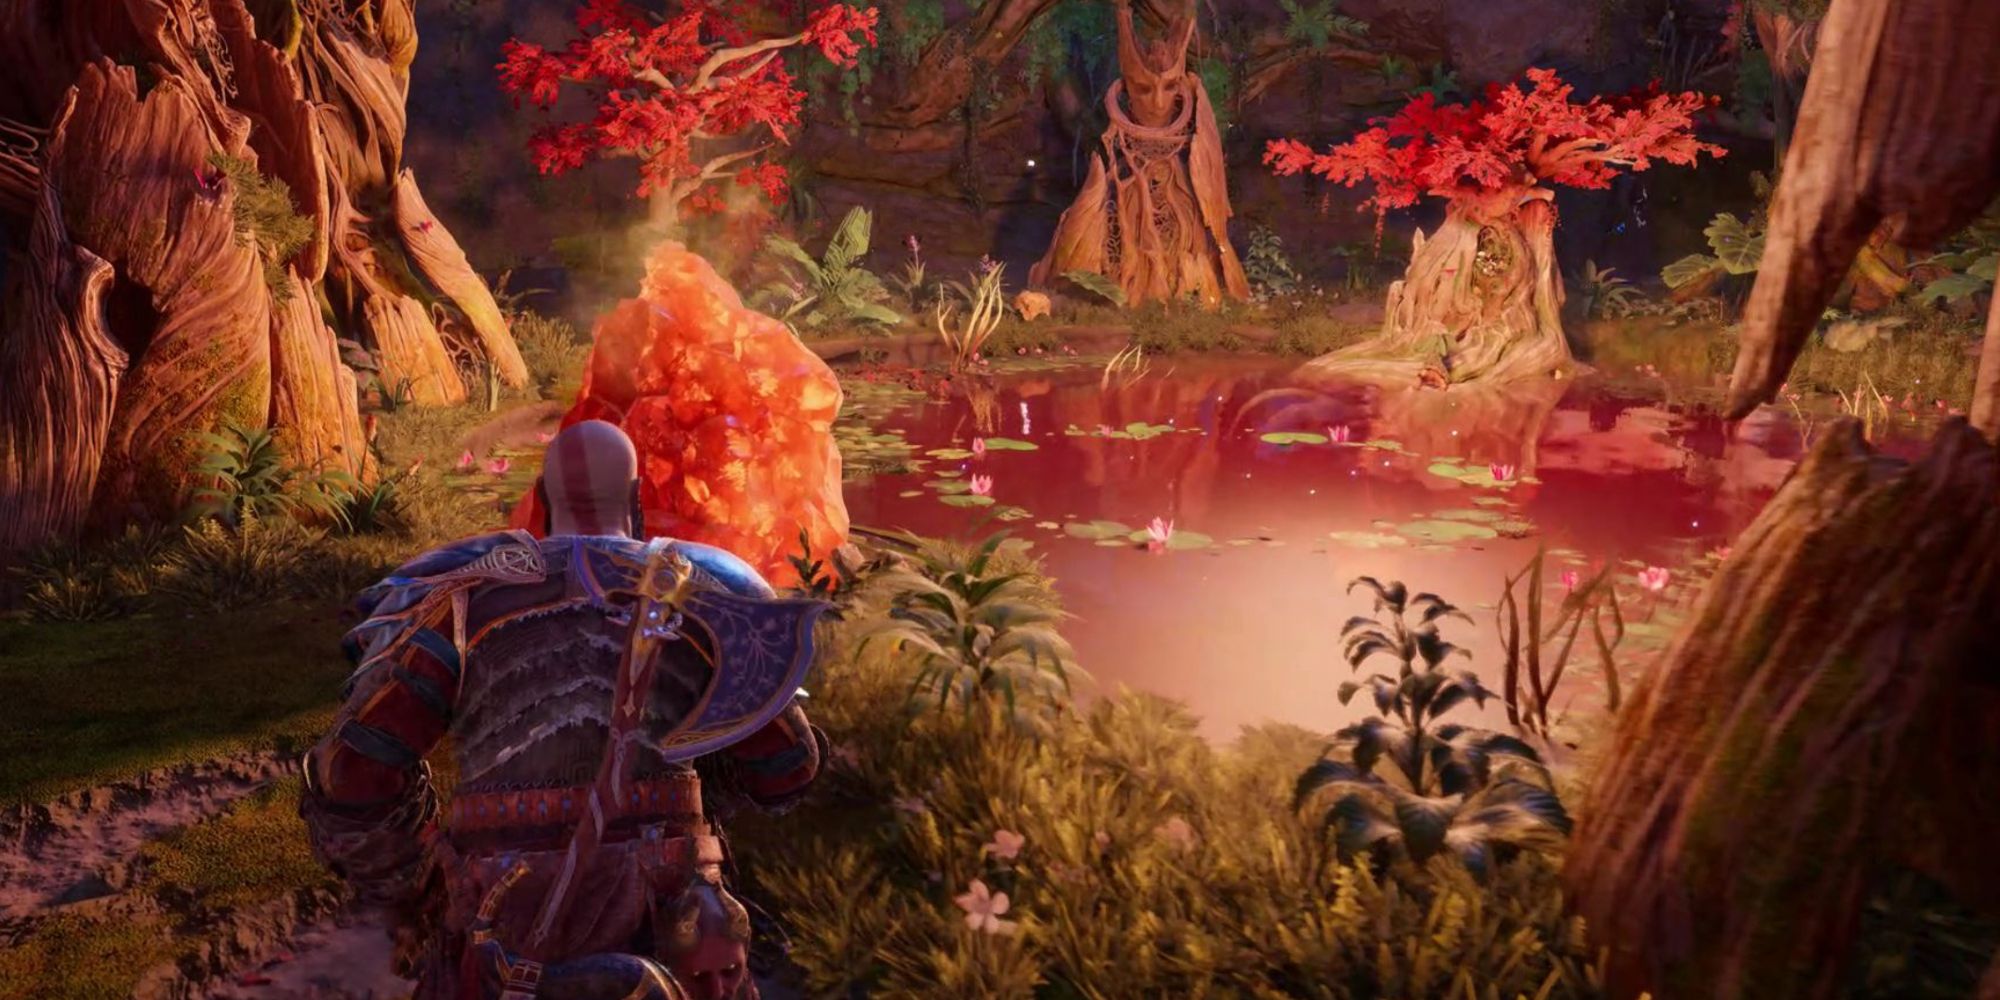 The Wishing Well in The Crater in God of War Ragnarok